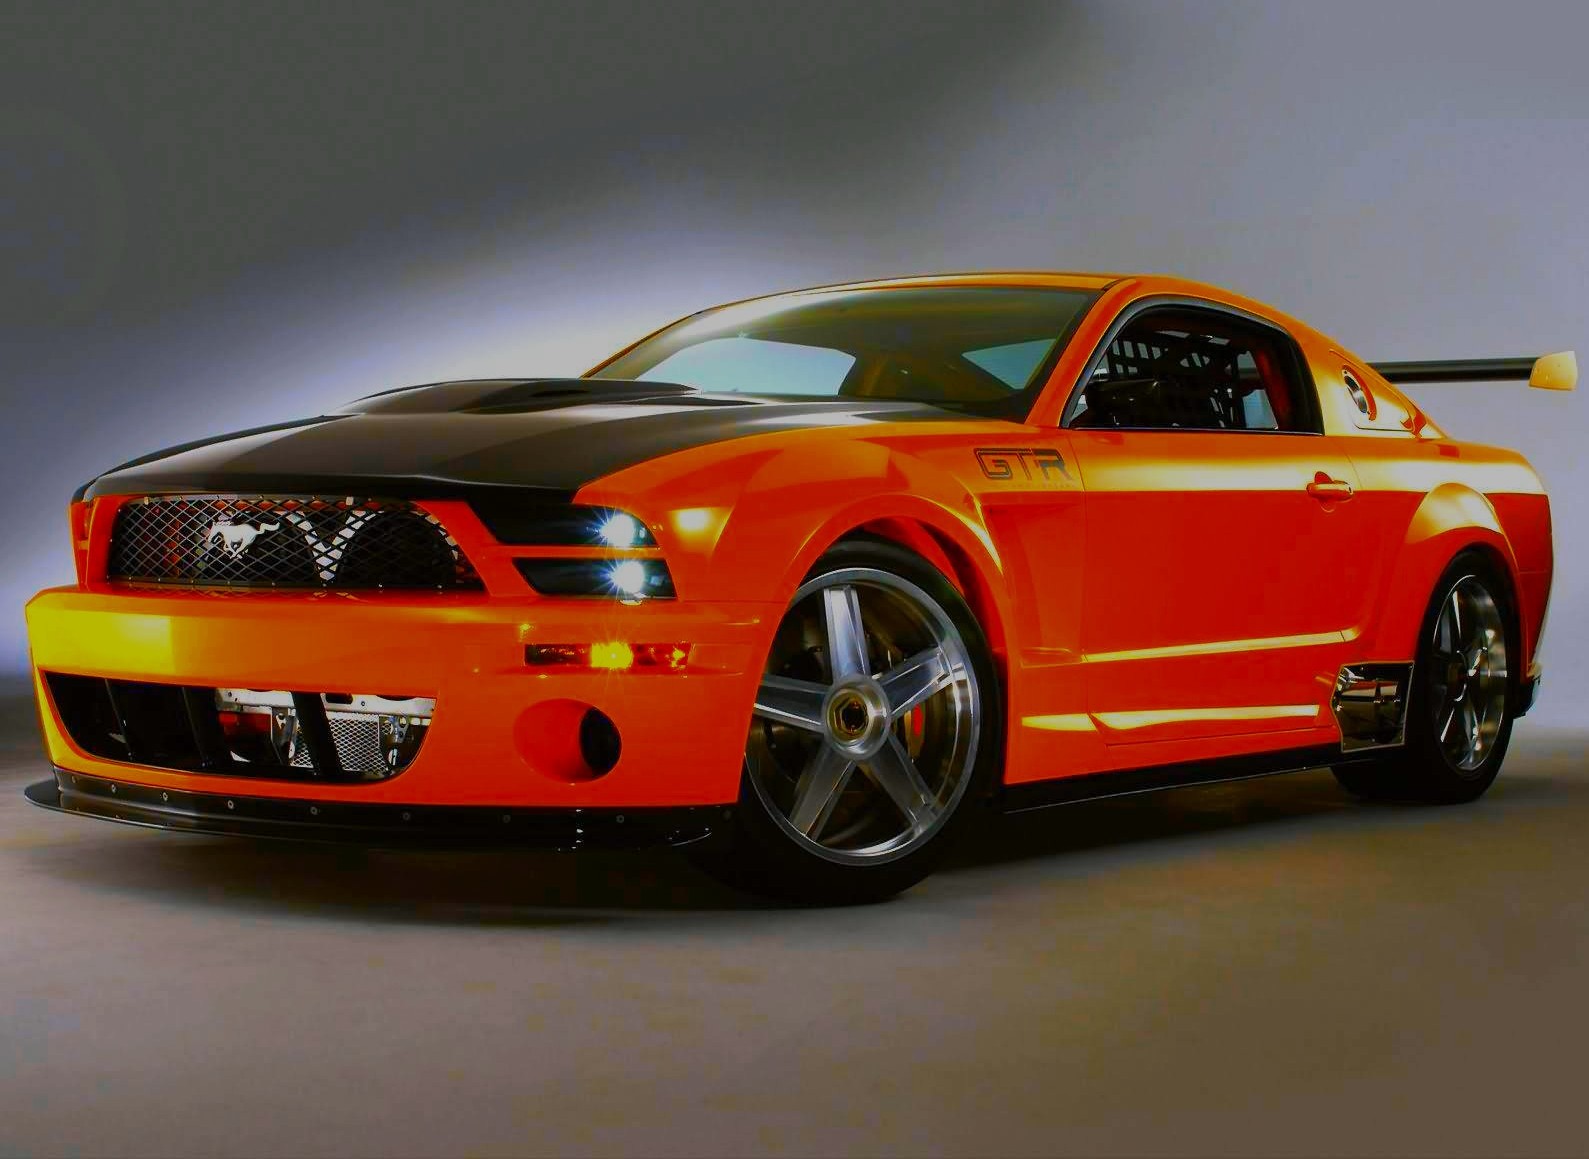 Mustang Shelby Gt500 Replica Tribute To The King